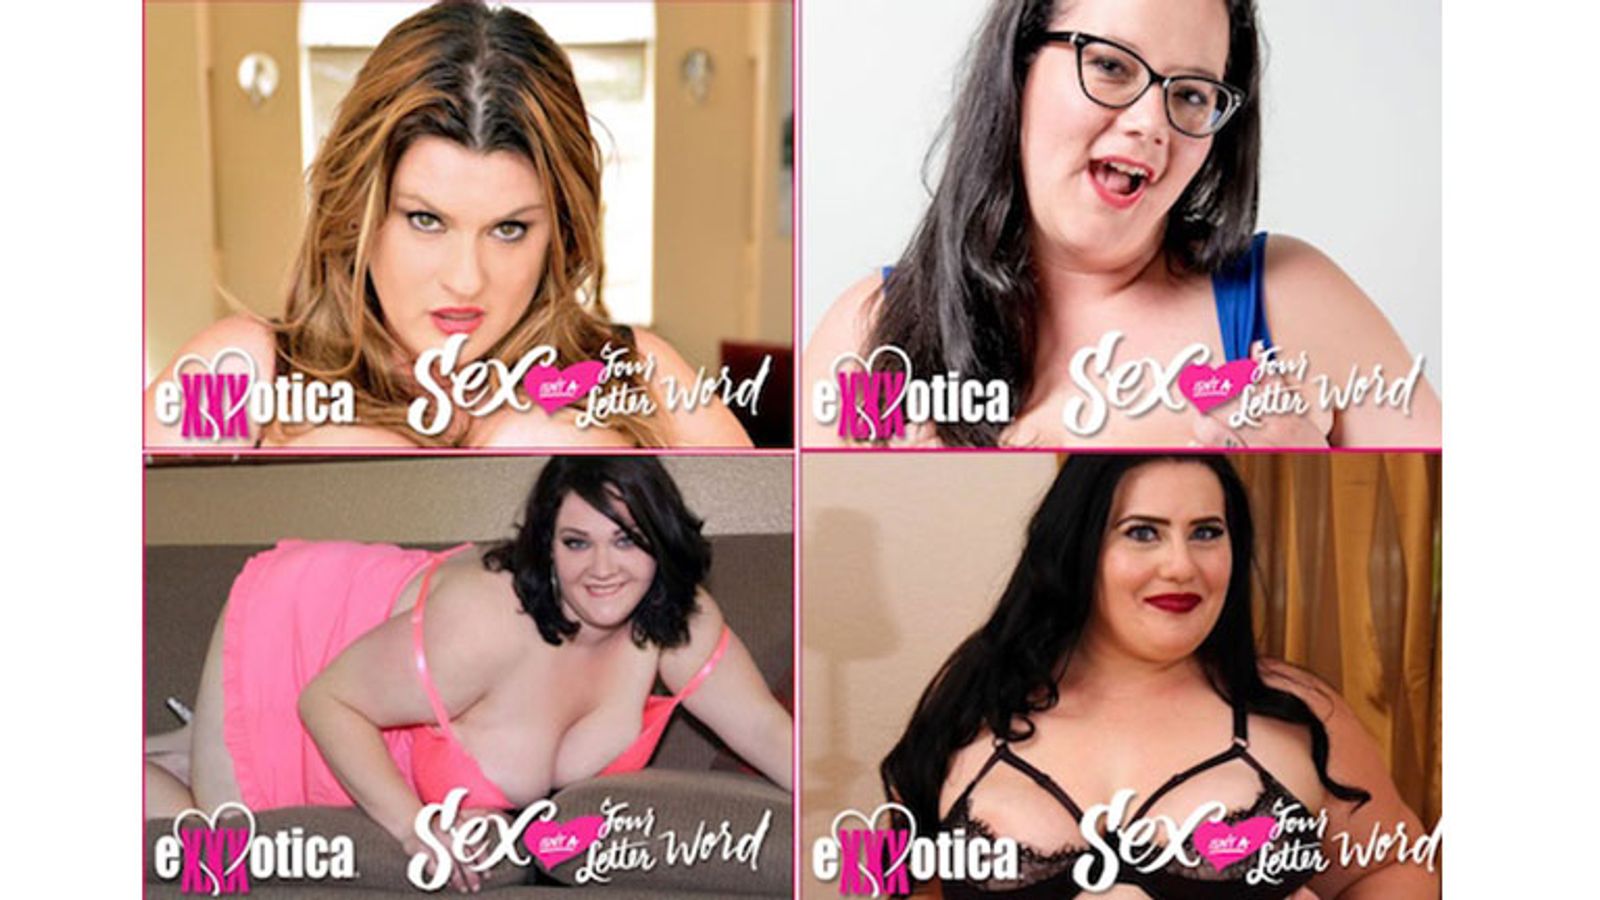 BBW Stars Will Shine at Exxxotica's Rodnievision Booth